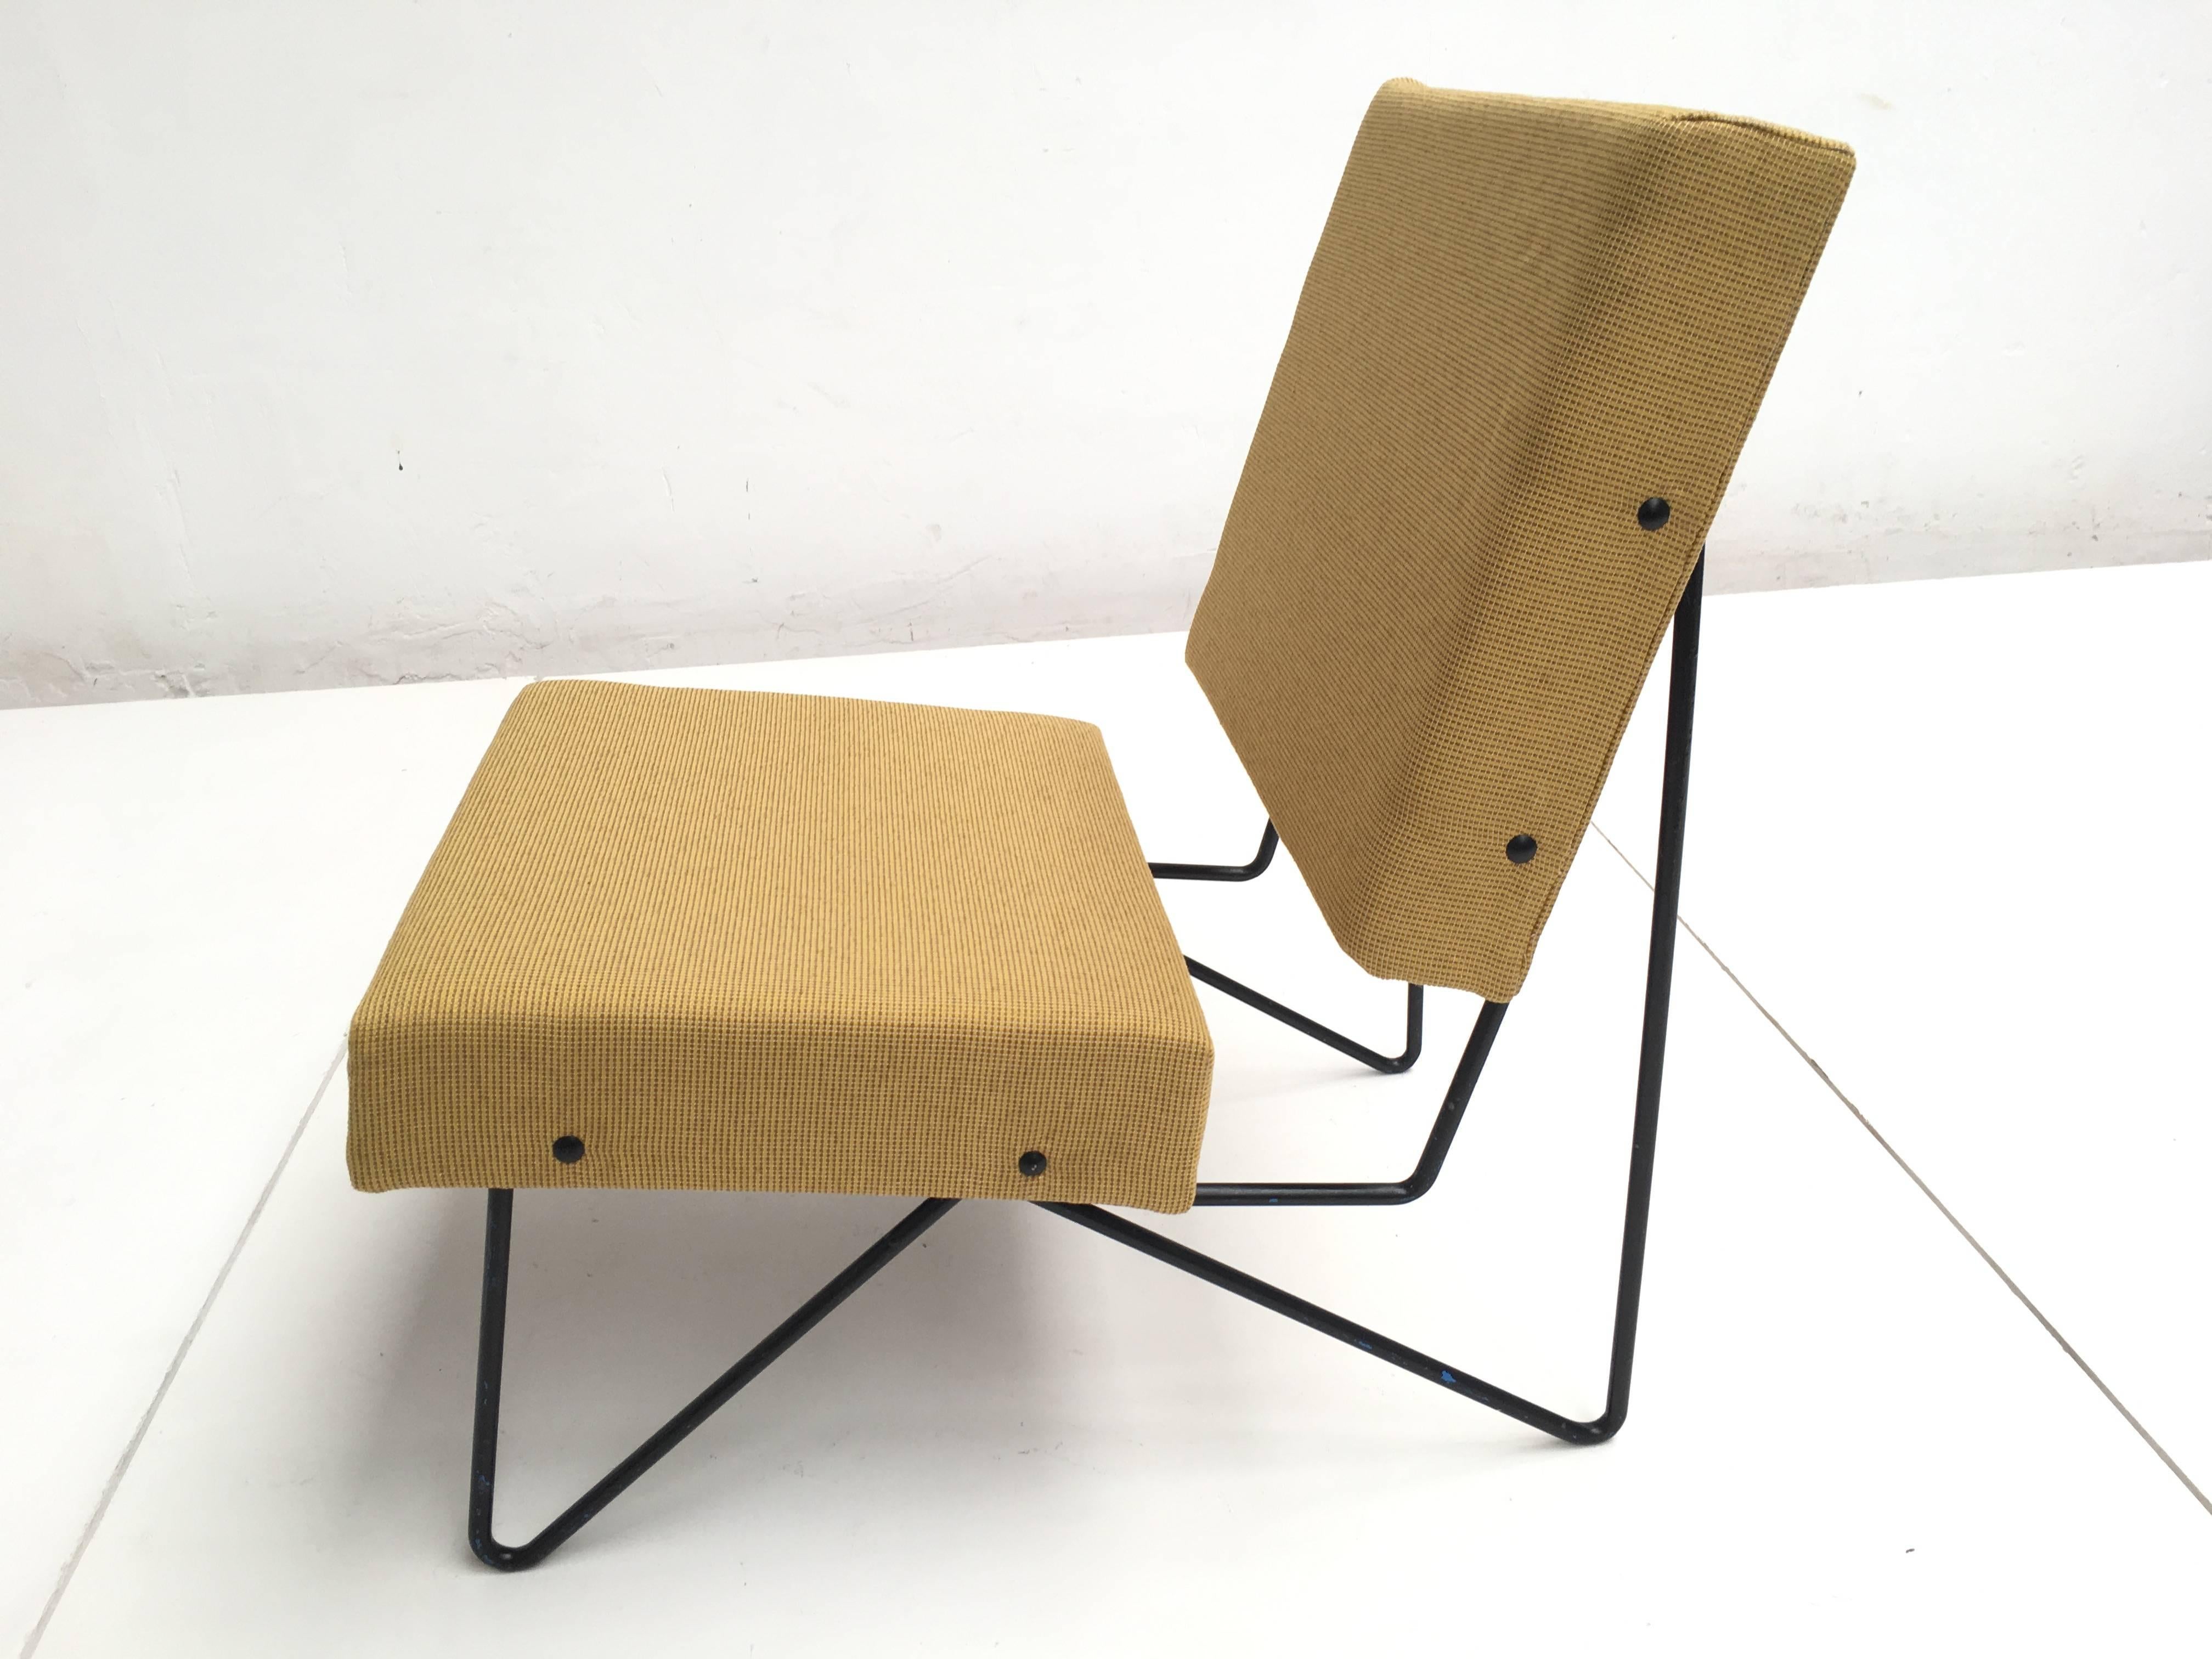 Steel Modernist Cees Braakman FM03 Combex Lounge Chair for UMS Pastoe 1953 Restored